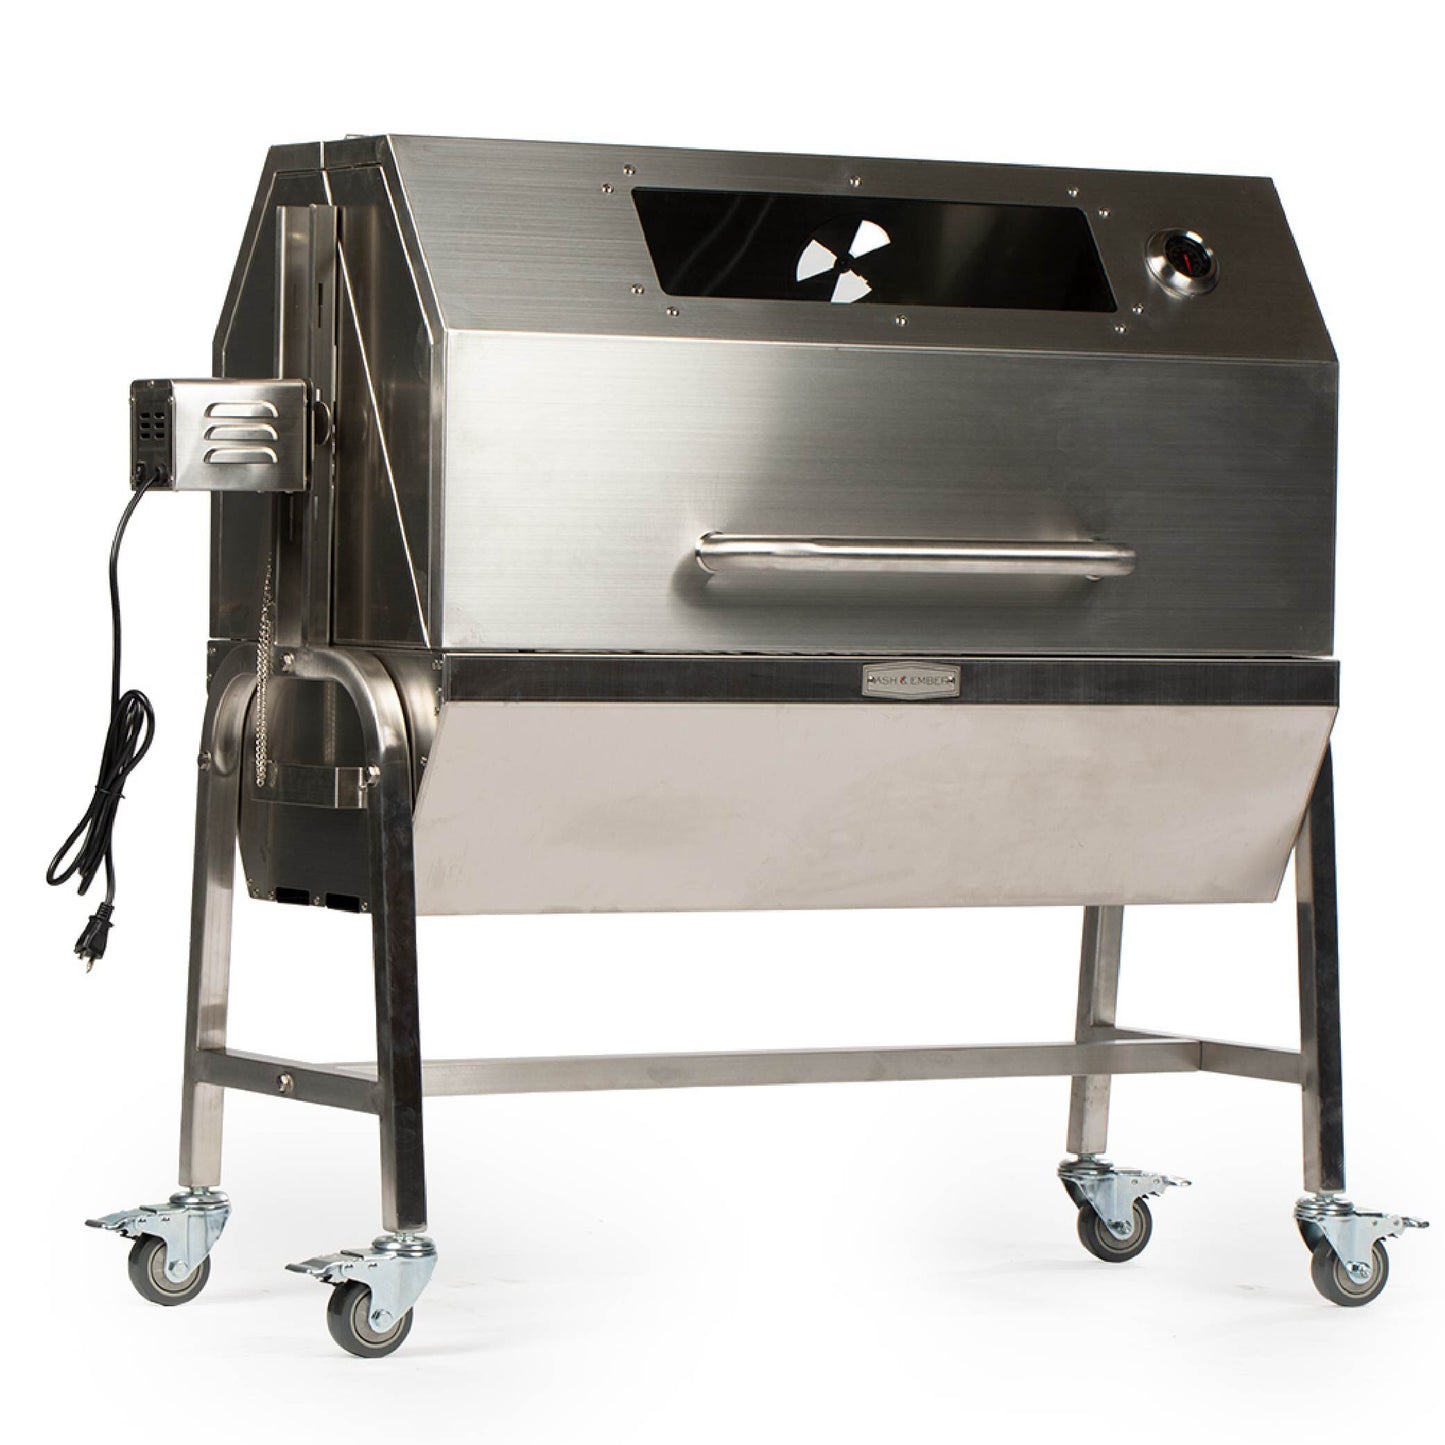 13W Rotisserie Grill with Hood - view 1